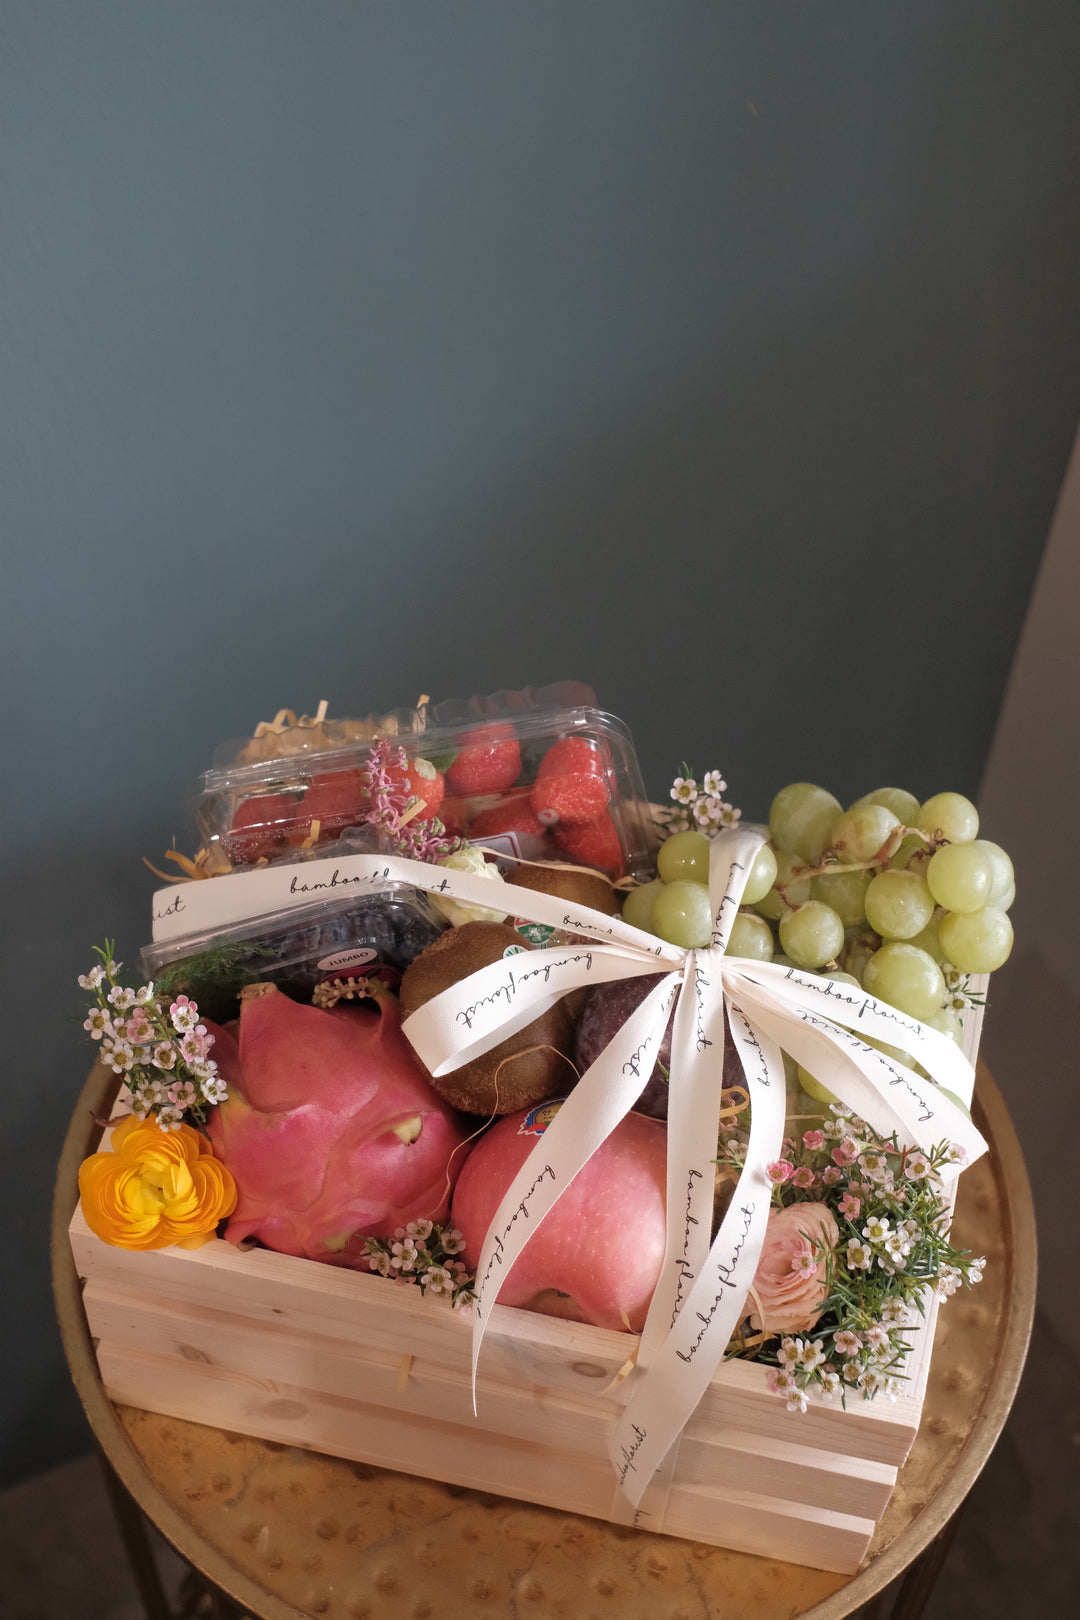 Finding the perfect fruit basket to delivery in Penang? "The Covent Fruit Co"   - fresh fruits deliver in a wooden crate, this set includes grapes, kiwis, apples, dragon fruit, strawberries, blueberries, plum & honeydew (seasonal). Finishing off with fresh flowers of the day. Same day fruit basket delivery in Penang